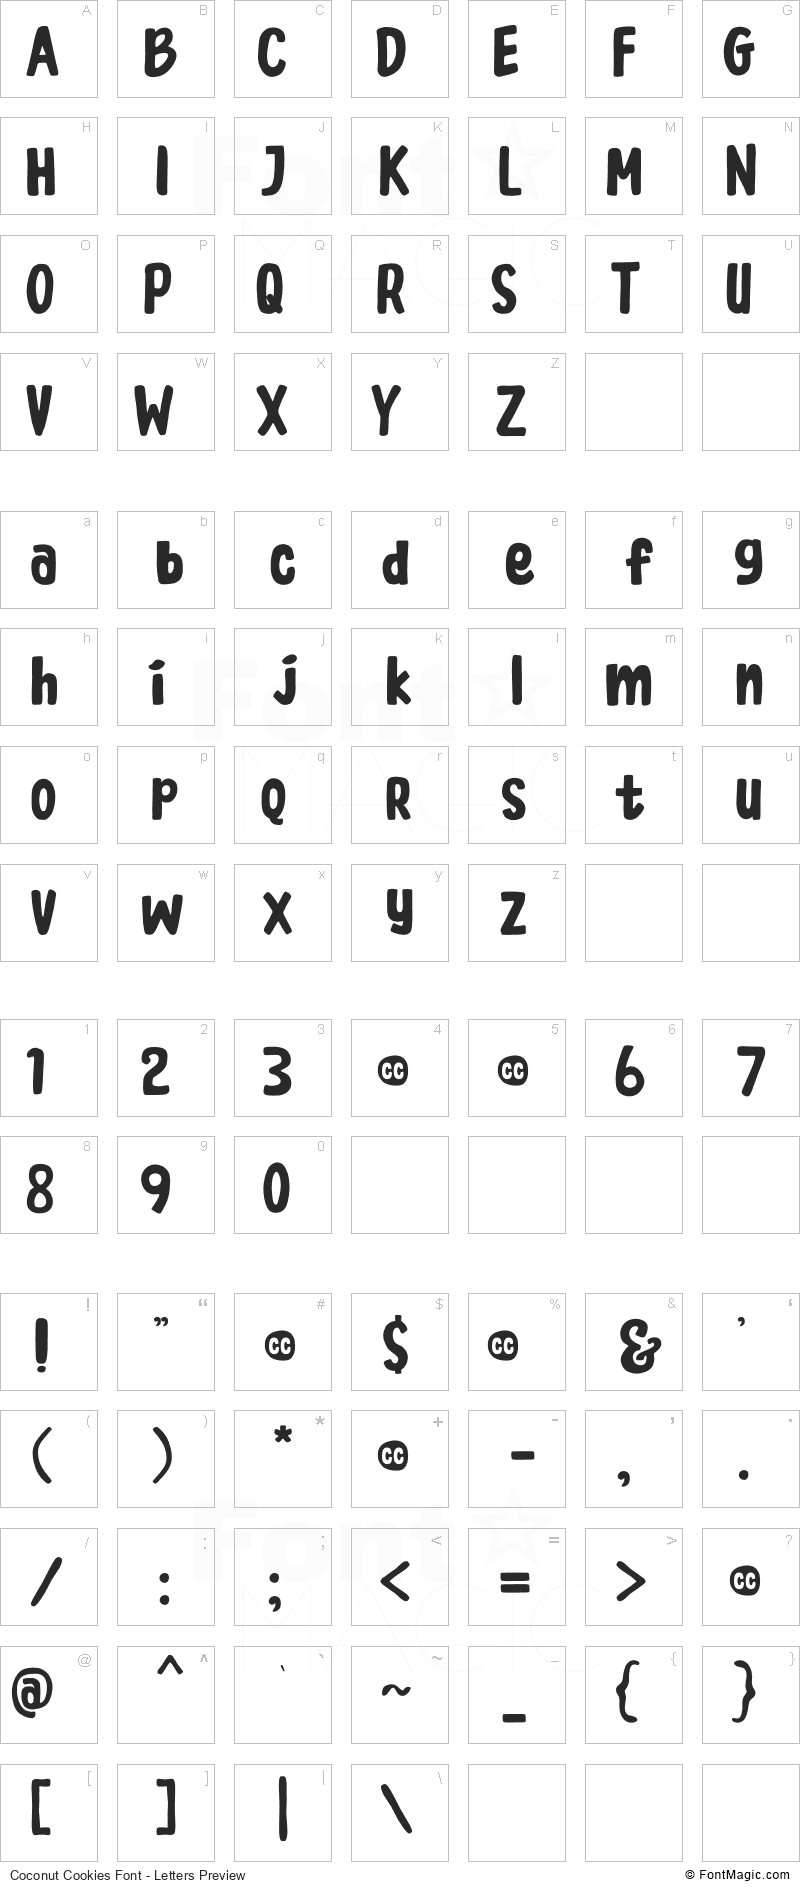 Coconut Cookies Font - All Latters Preview Chart